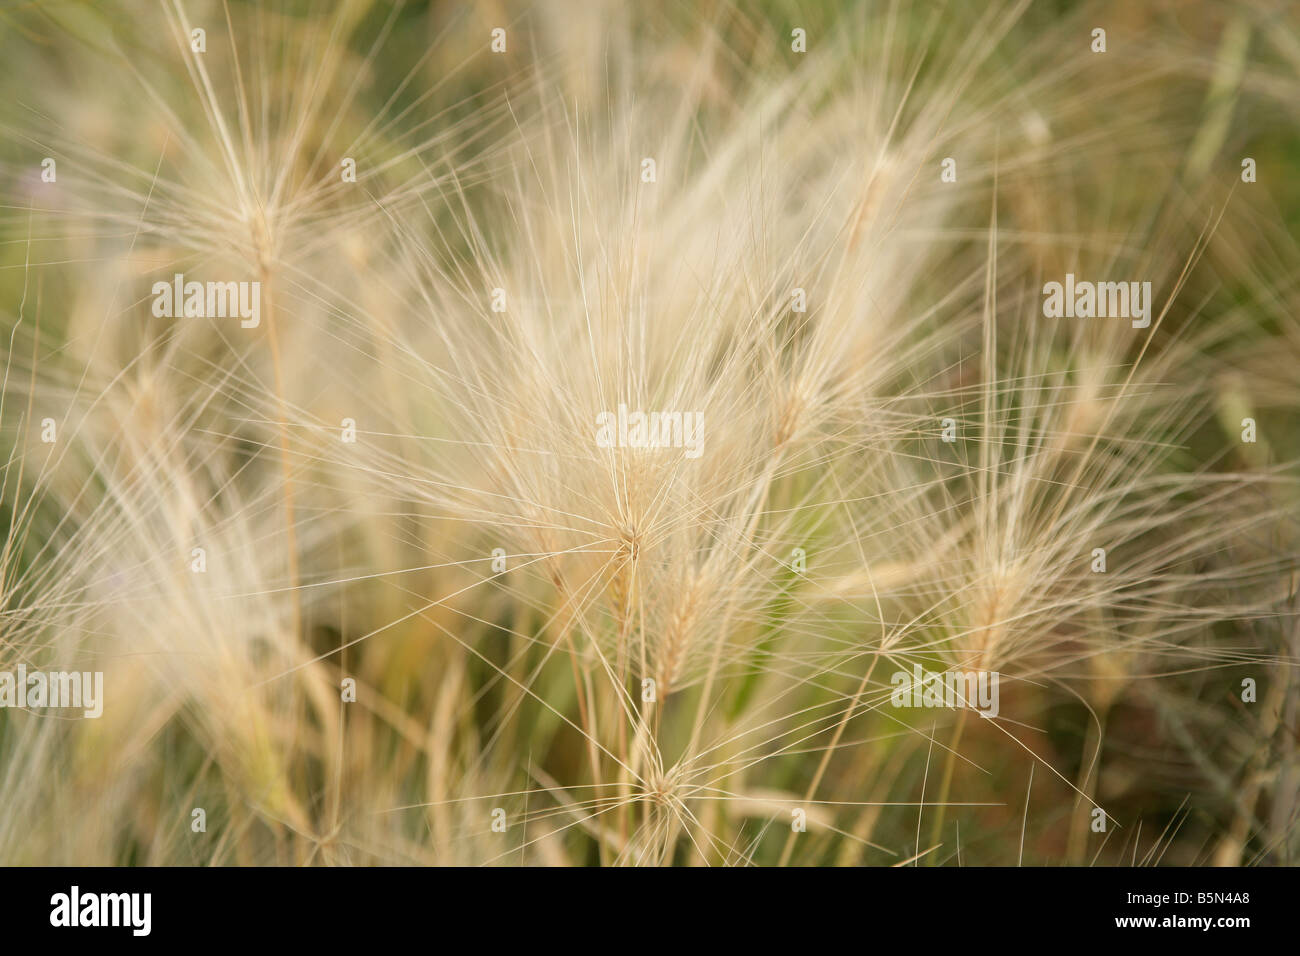 Close up image of long grasses in seed blowing in the wind in a field or meadow Stock Photo